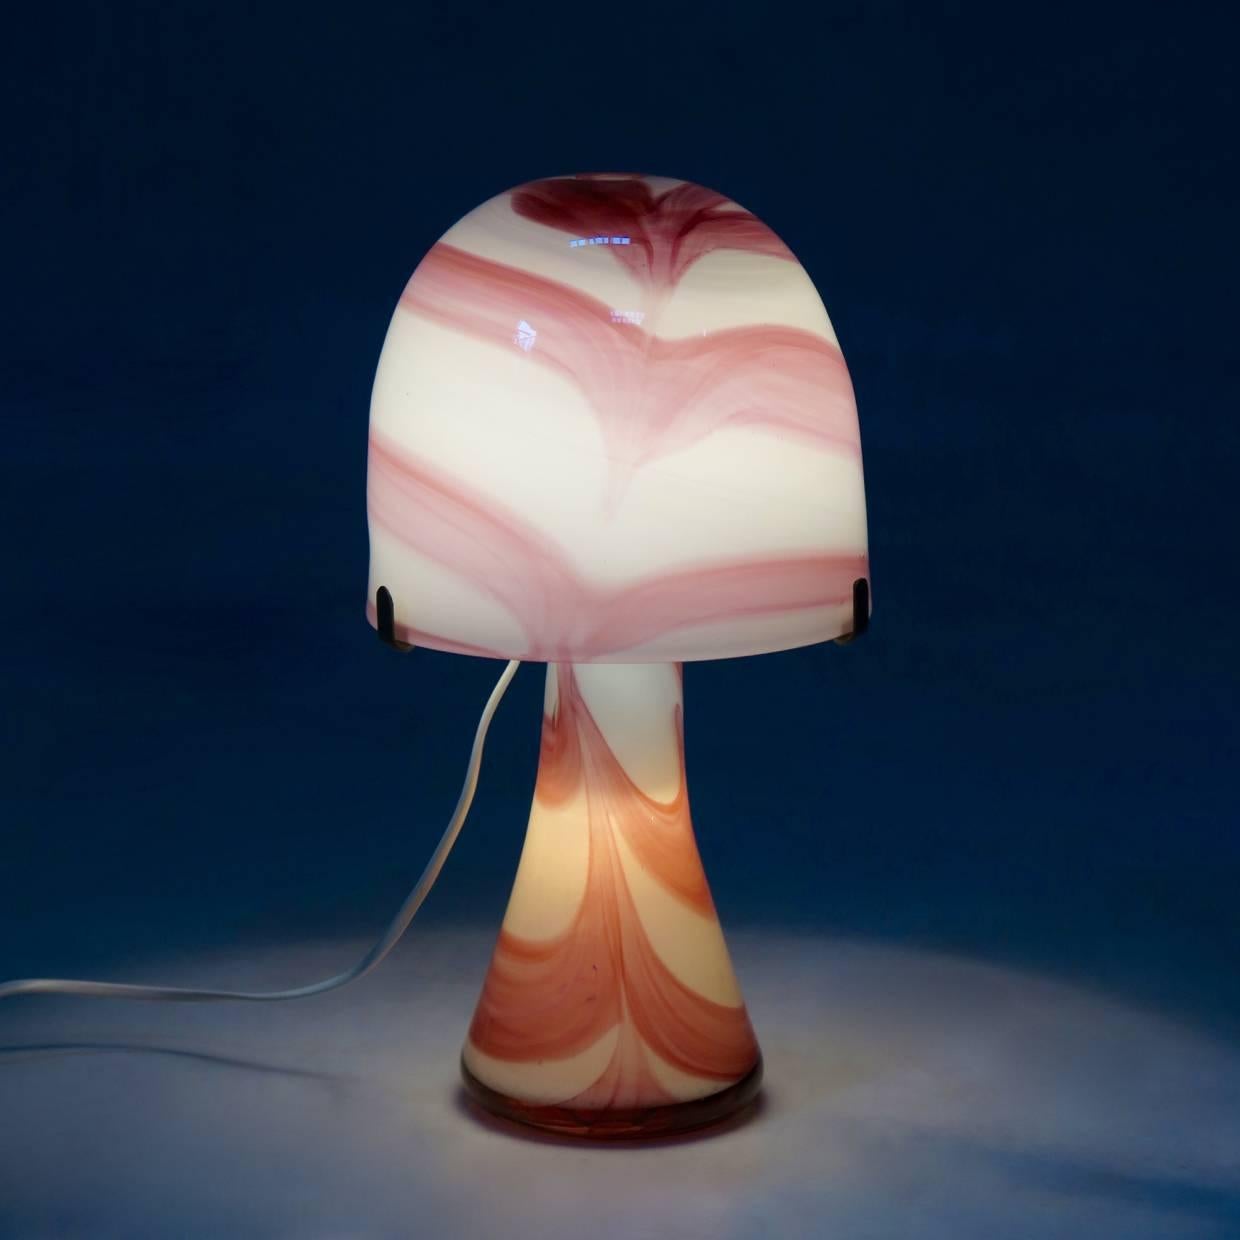 Very pretty table lamp with a swirling pink pattern on a white background.